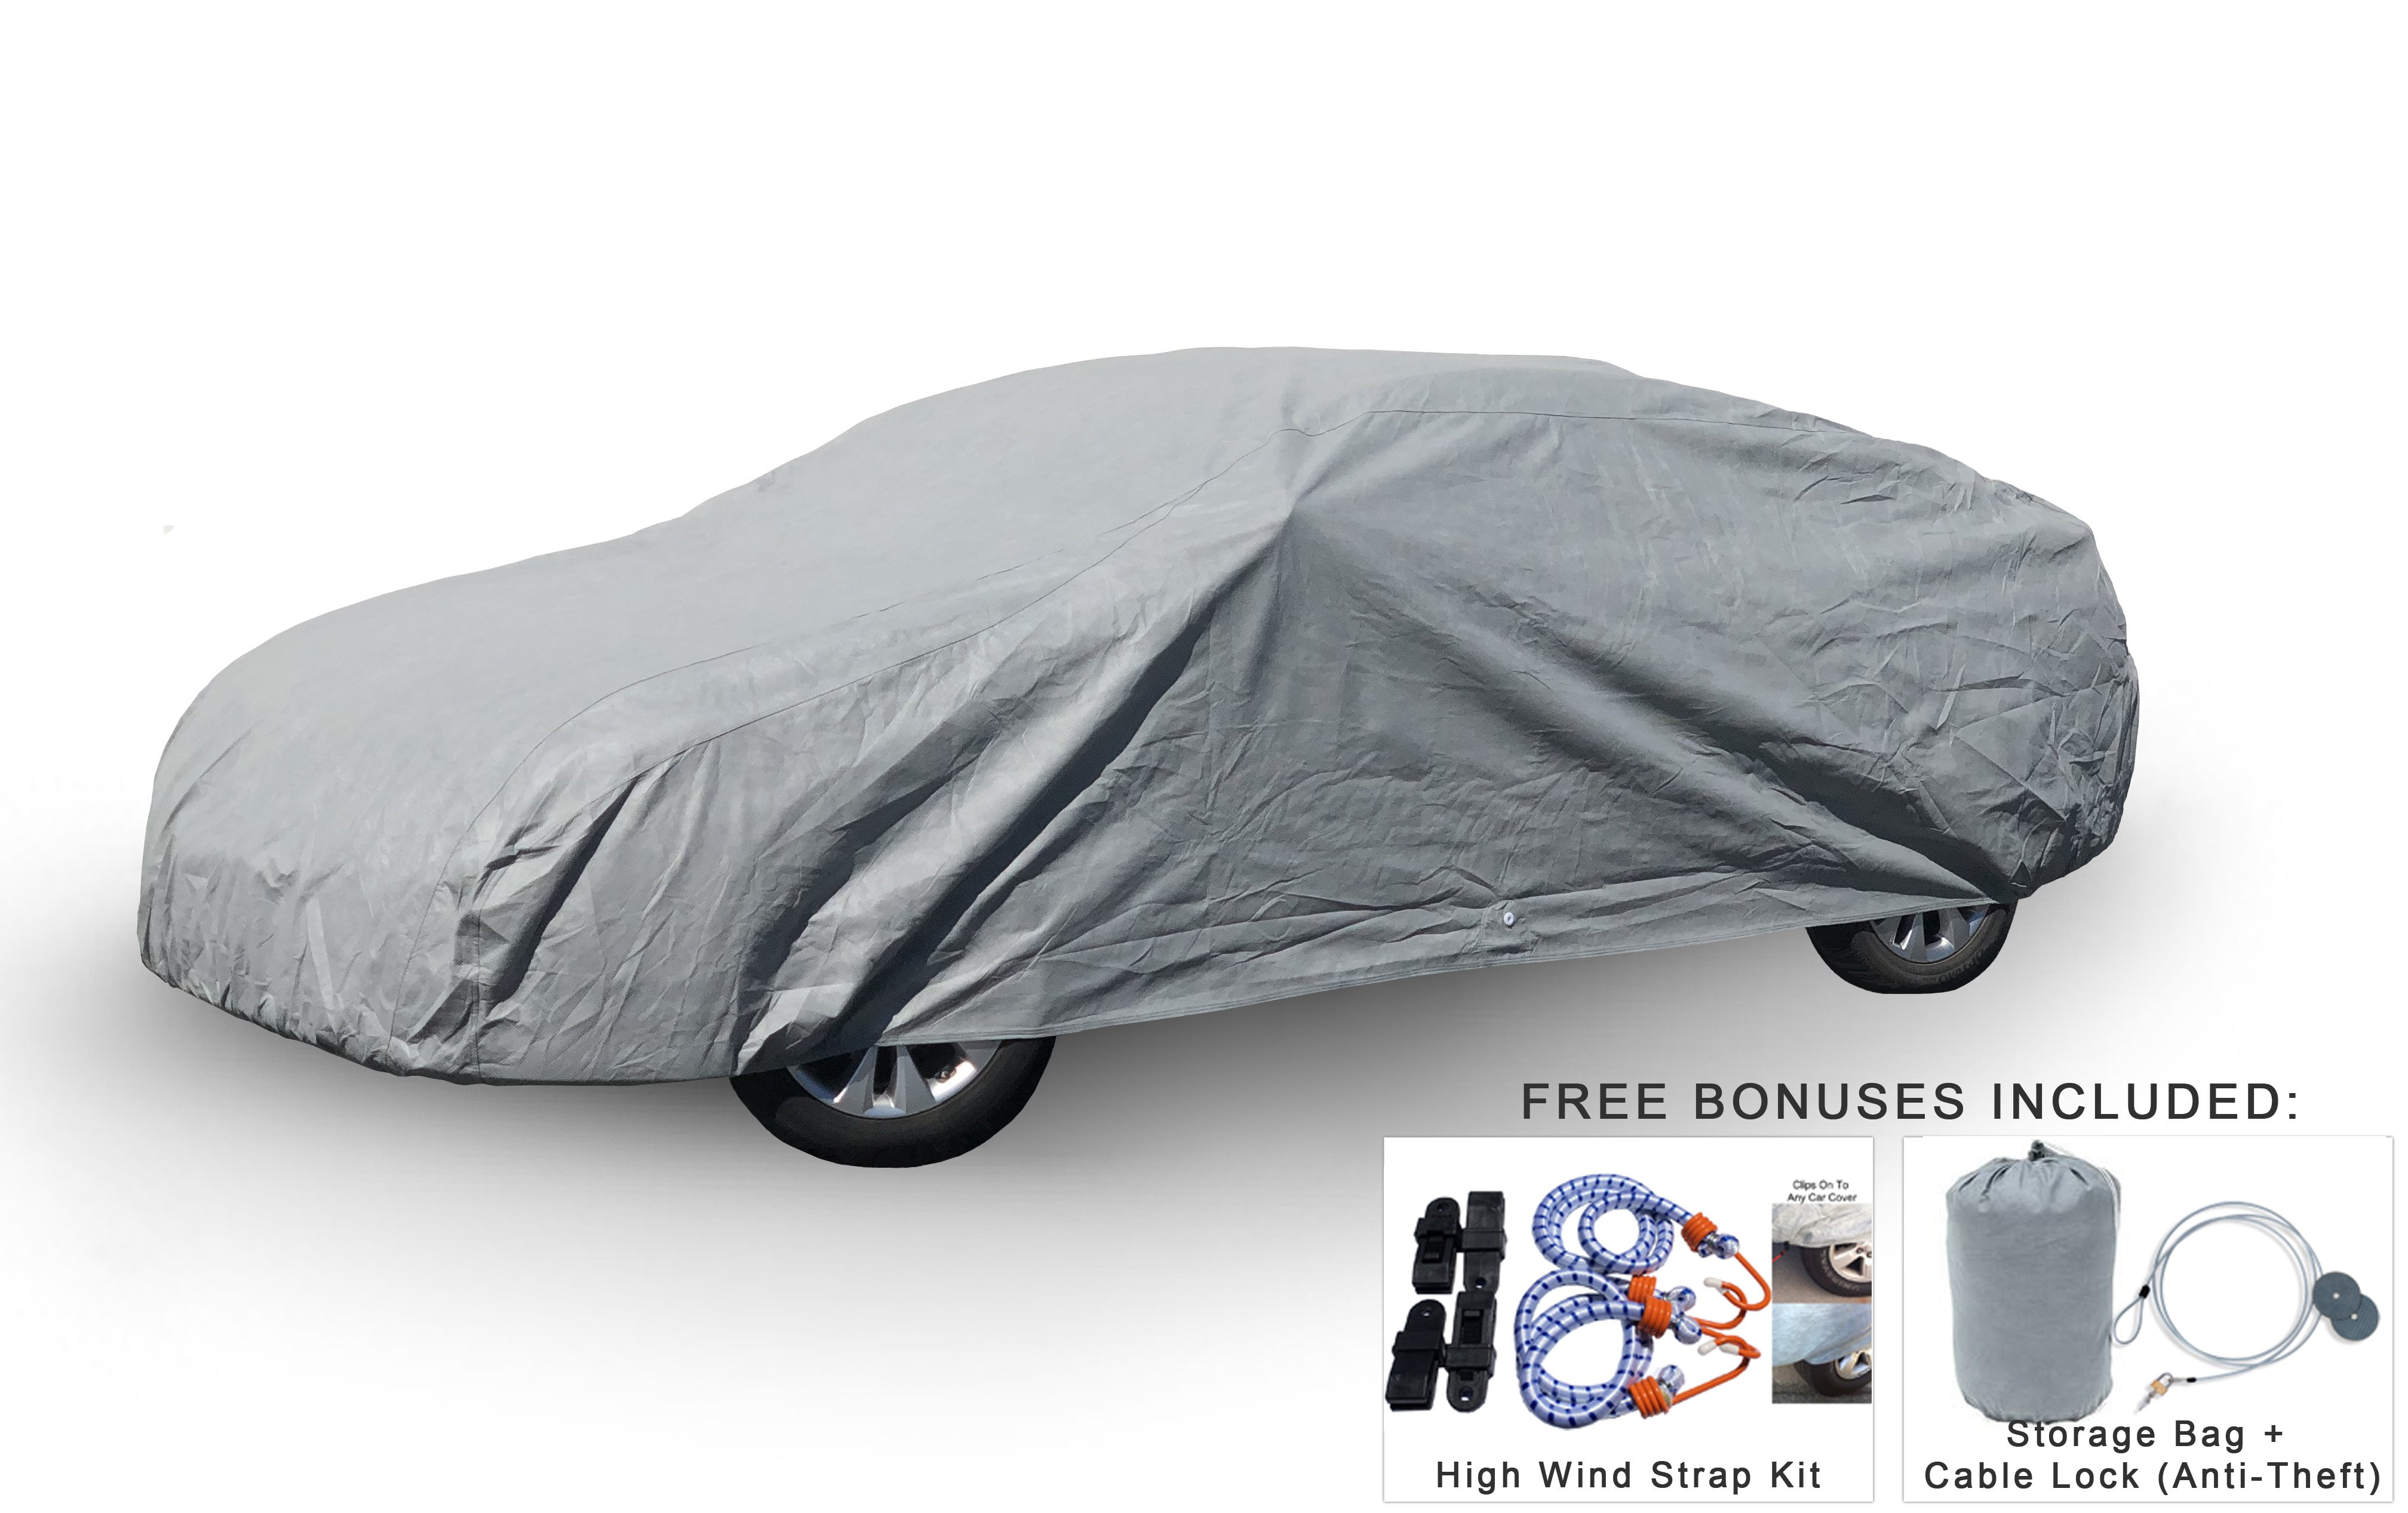 1998 1999 2000 2001 Chrysler Concorde Breathable Car Cover w/MirrorPocket 